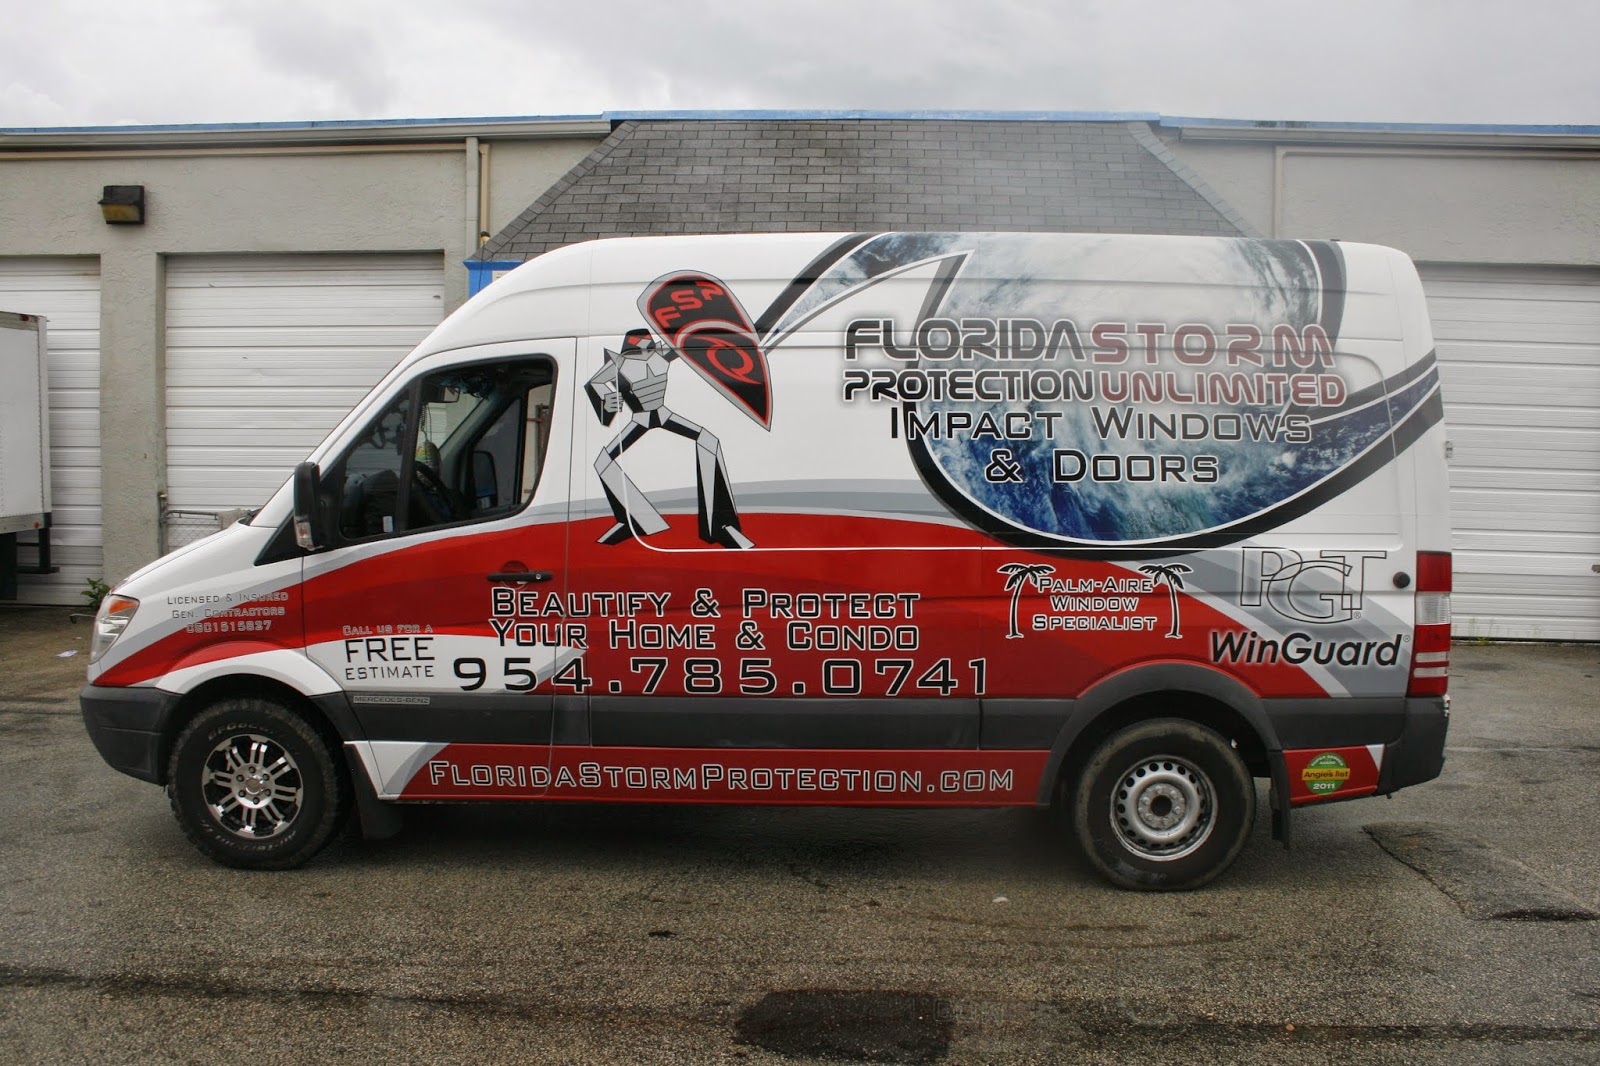 Car Wrap Solutions Blog | New Pics & News of Our Latest Car Wrap ...